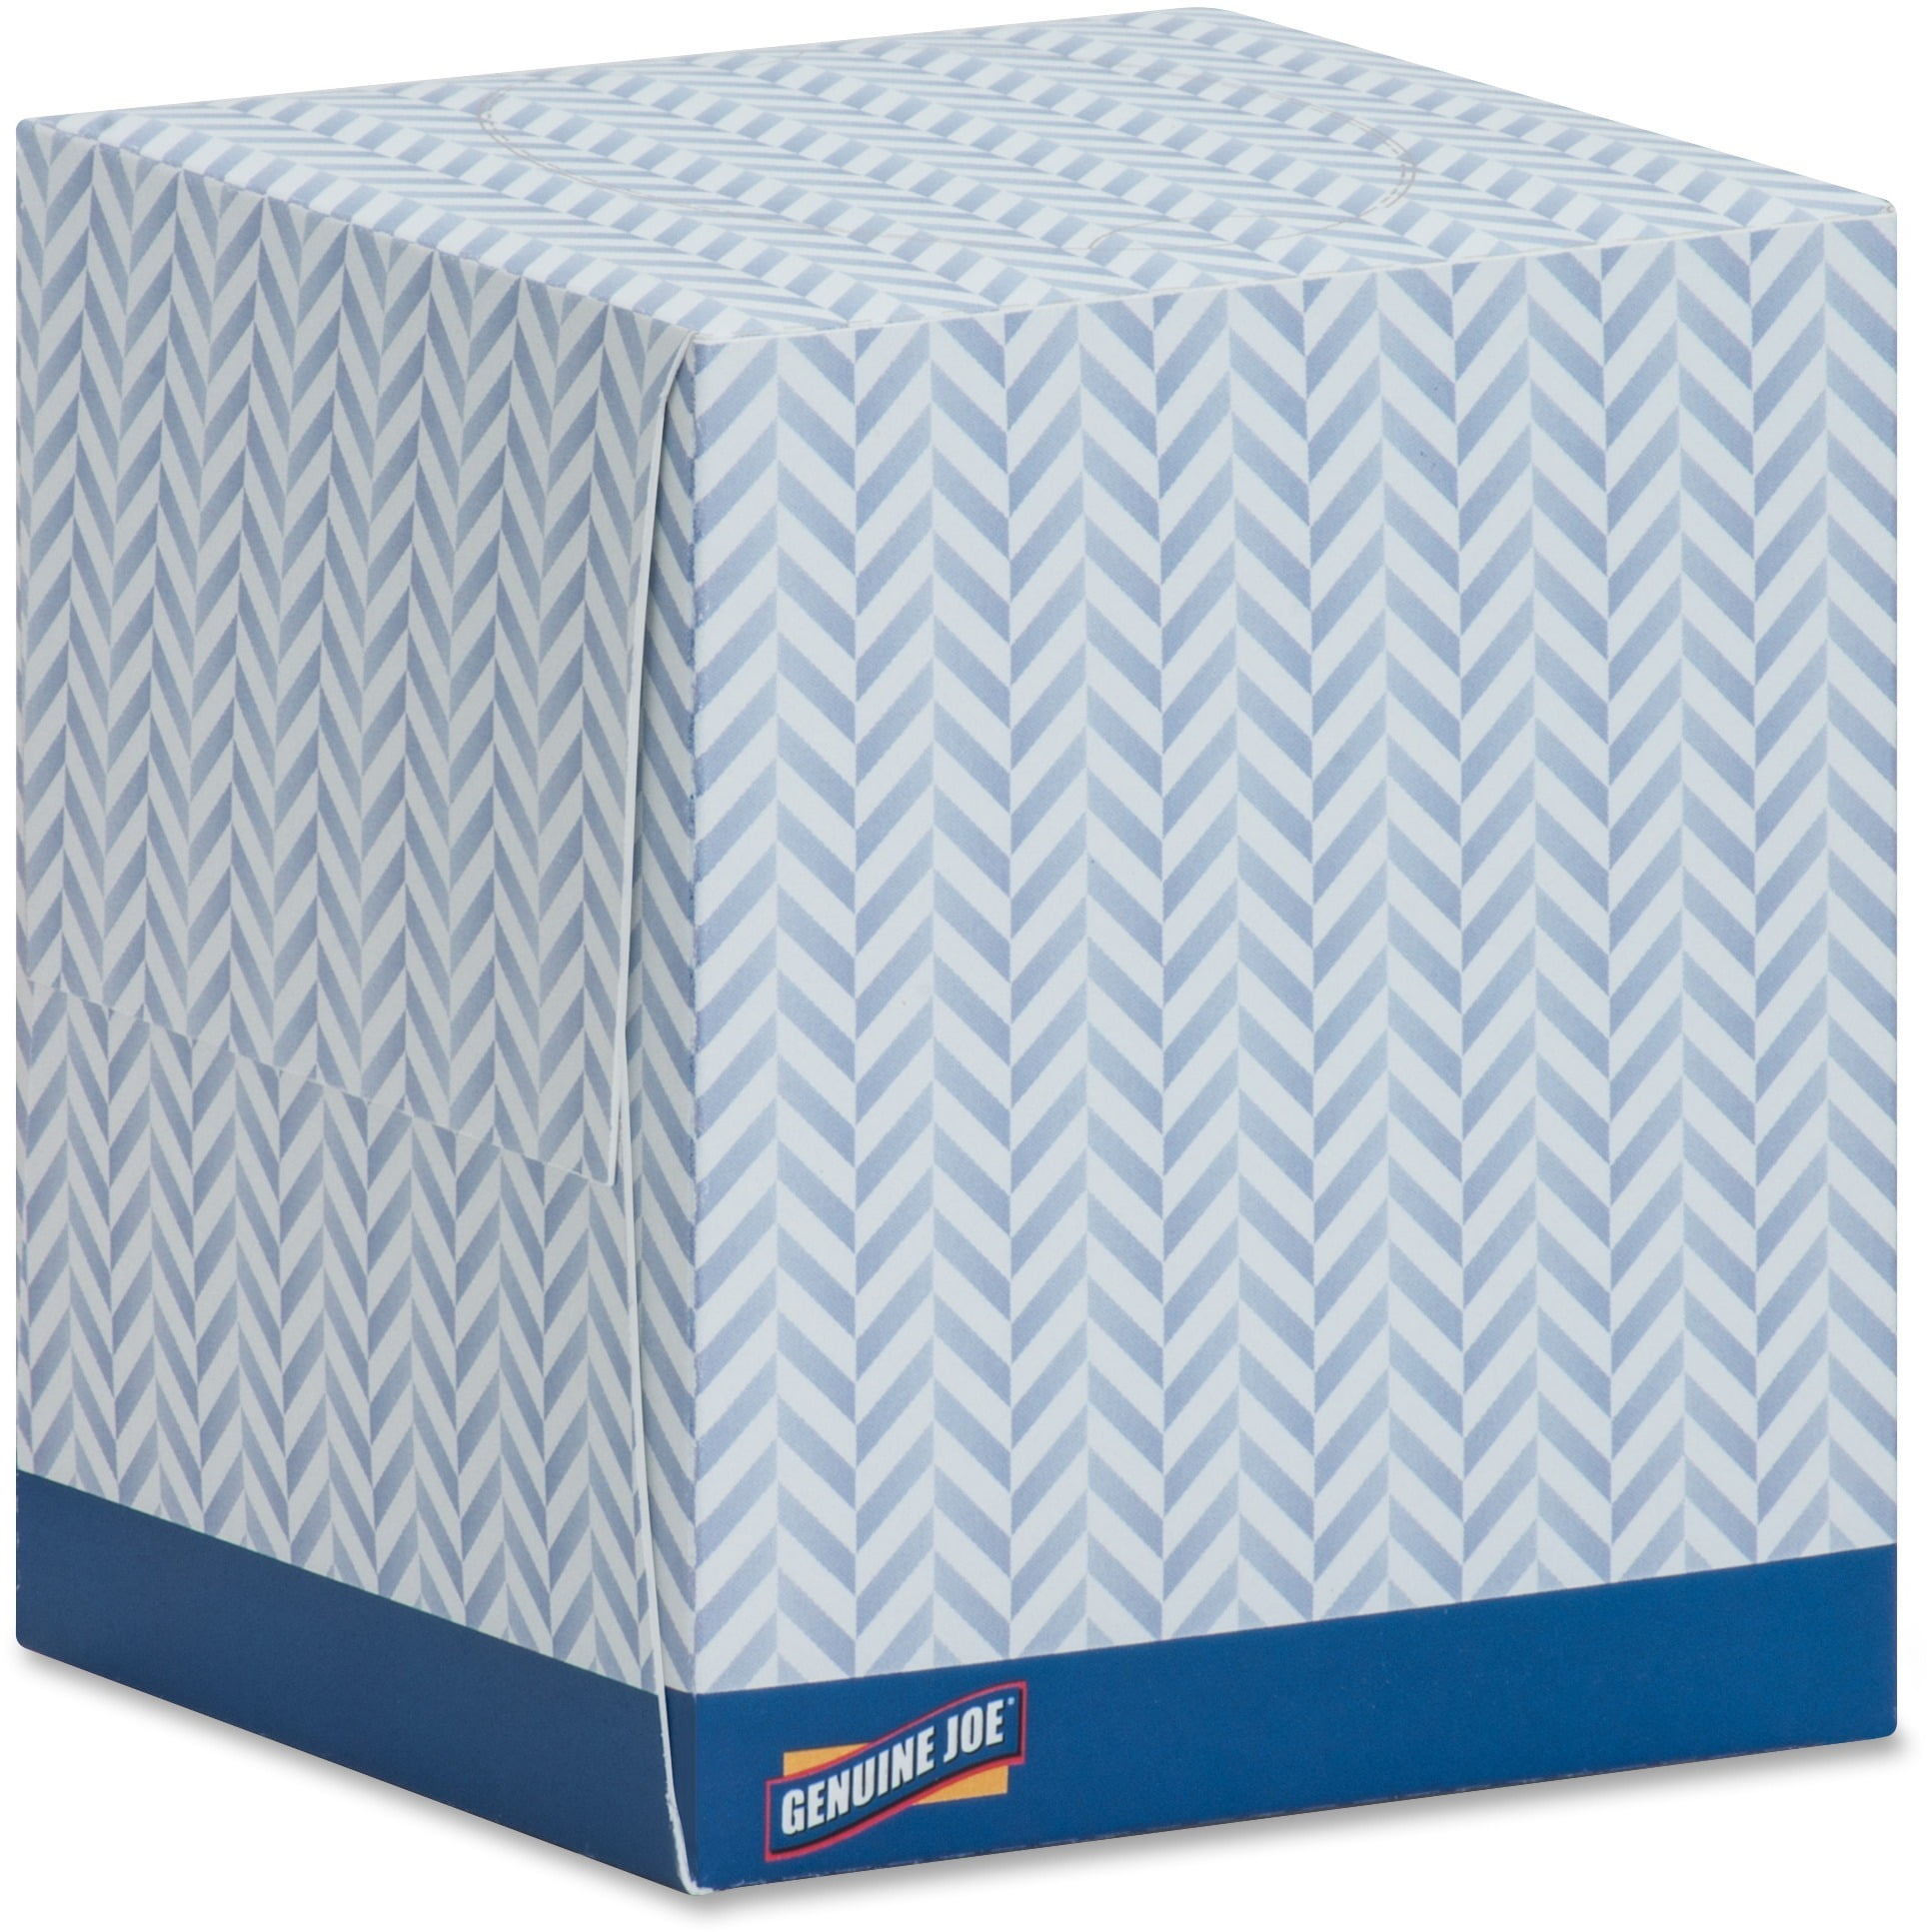 Bokon 12 Pack Facial Tissues Cube Boxes Square Tissues Boxes 2 Ply Soft  Tissue Paper Industrial Style Tissues Box Cube 80 Sheets Per Box for  Bathroom